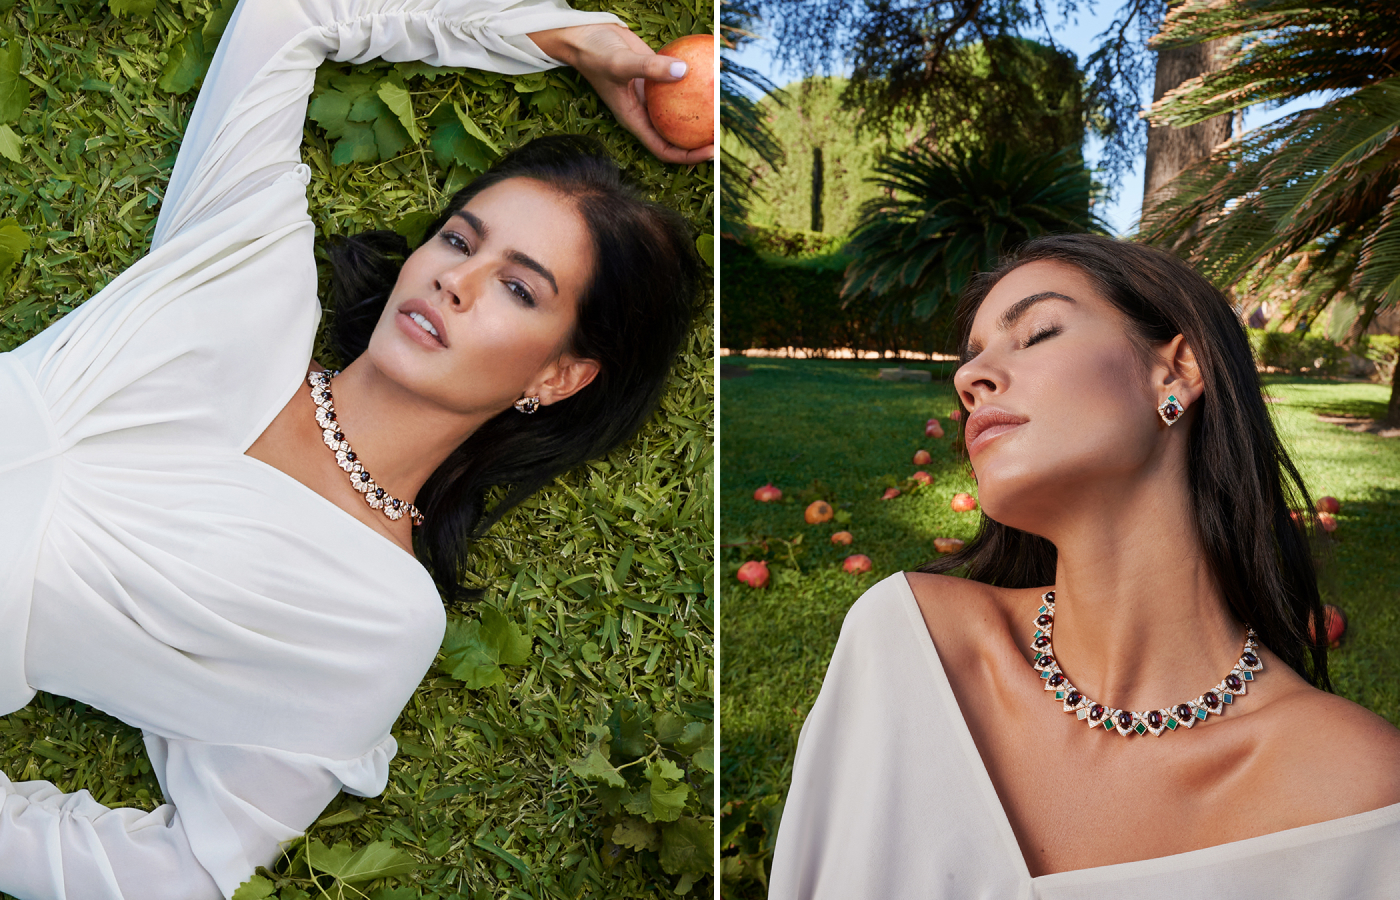 A model wears necklaces from the Jena High Jewellery collection by Al Zain